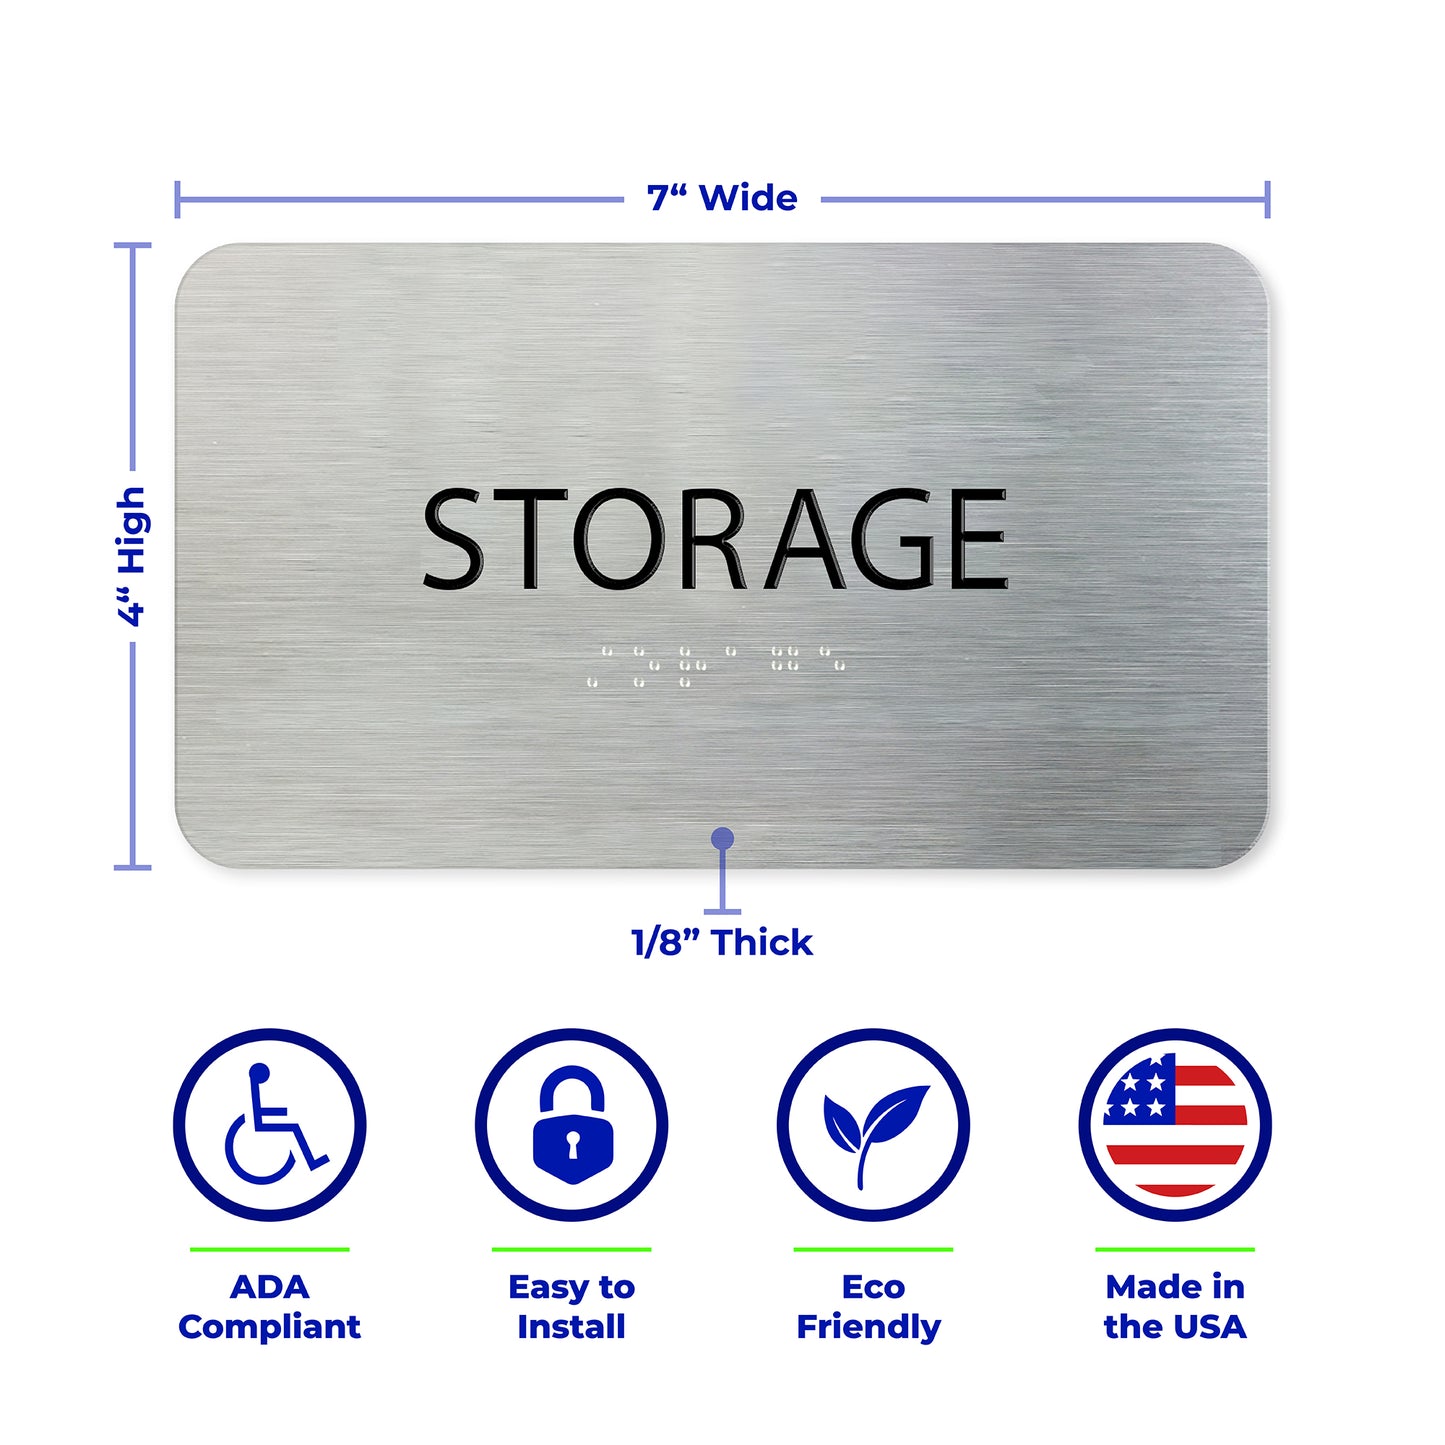 STORAGE Sign, ADA compliant, Storage Room Sign, Aluminum Brushed Silver , Black Raised Text, Grade 2 Braille, 7" x 4"